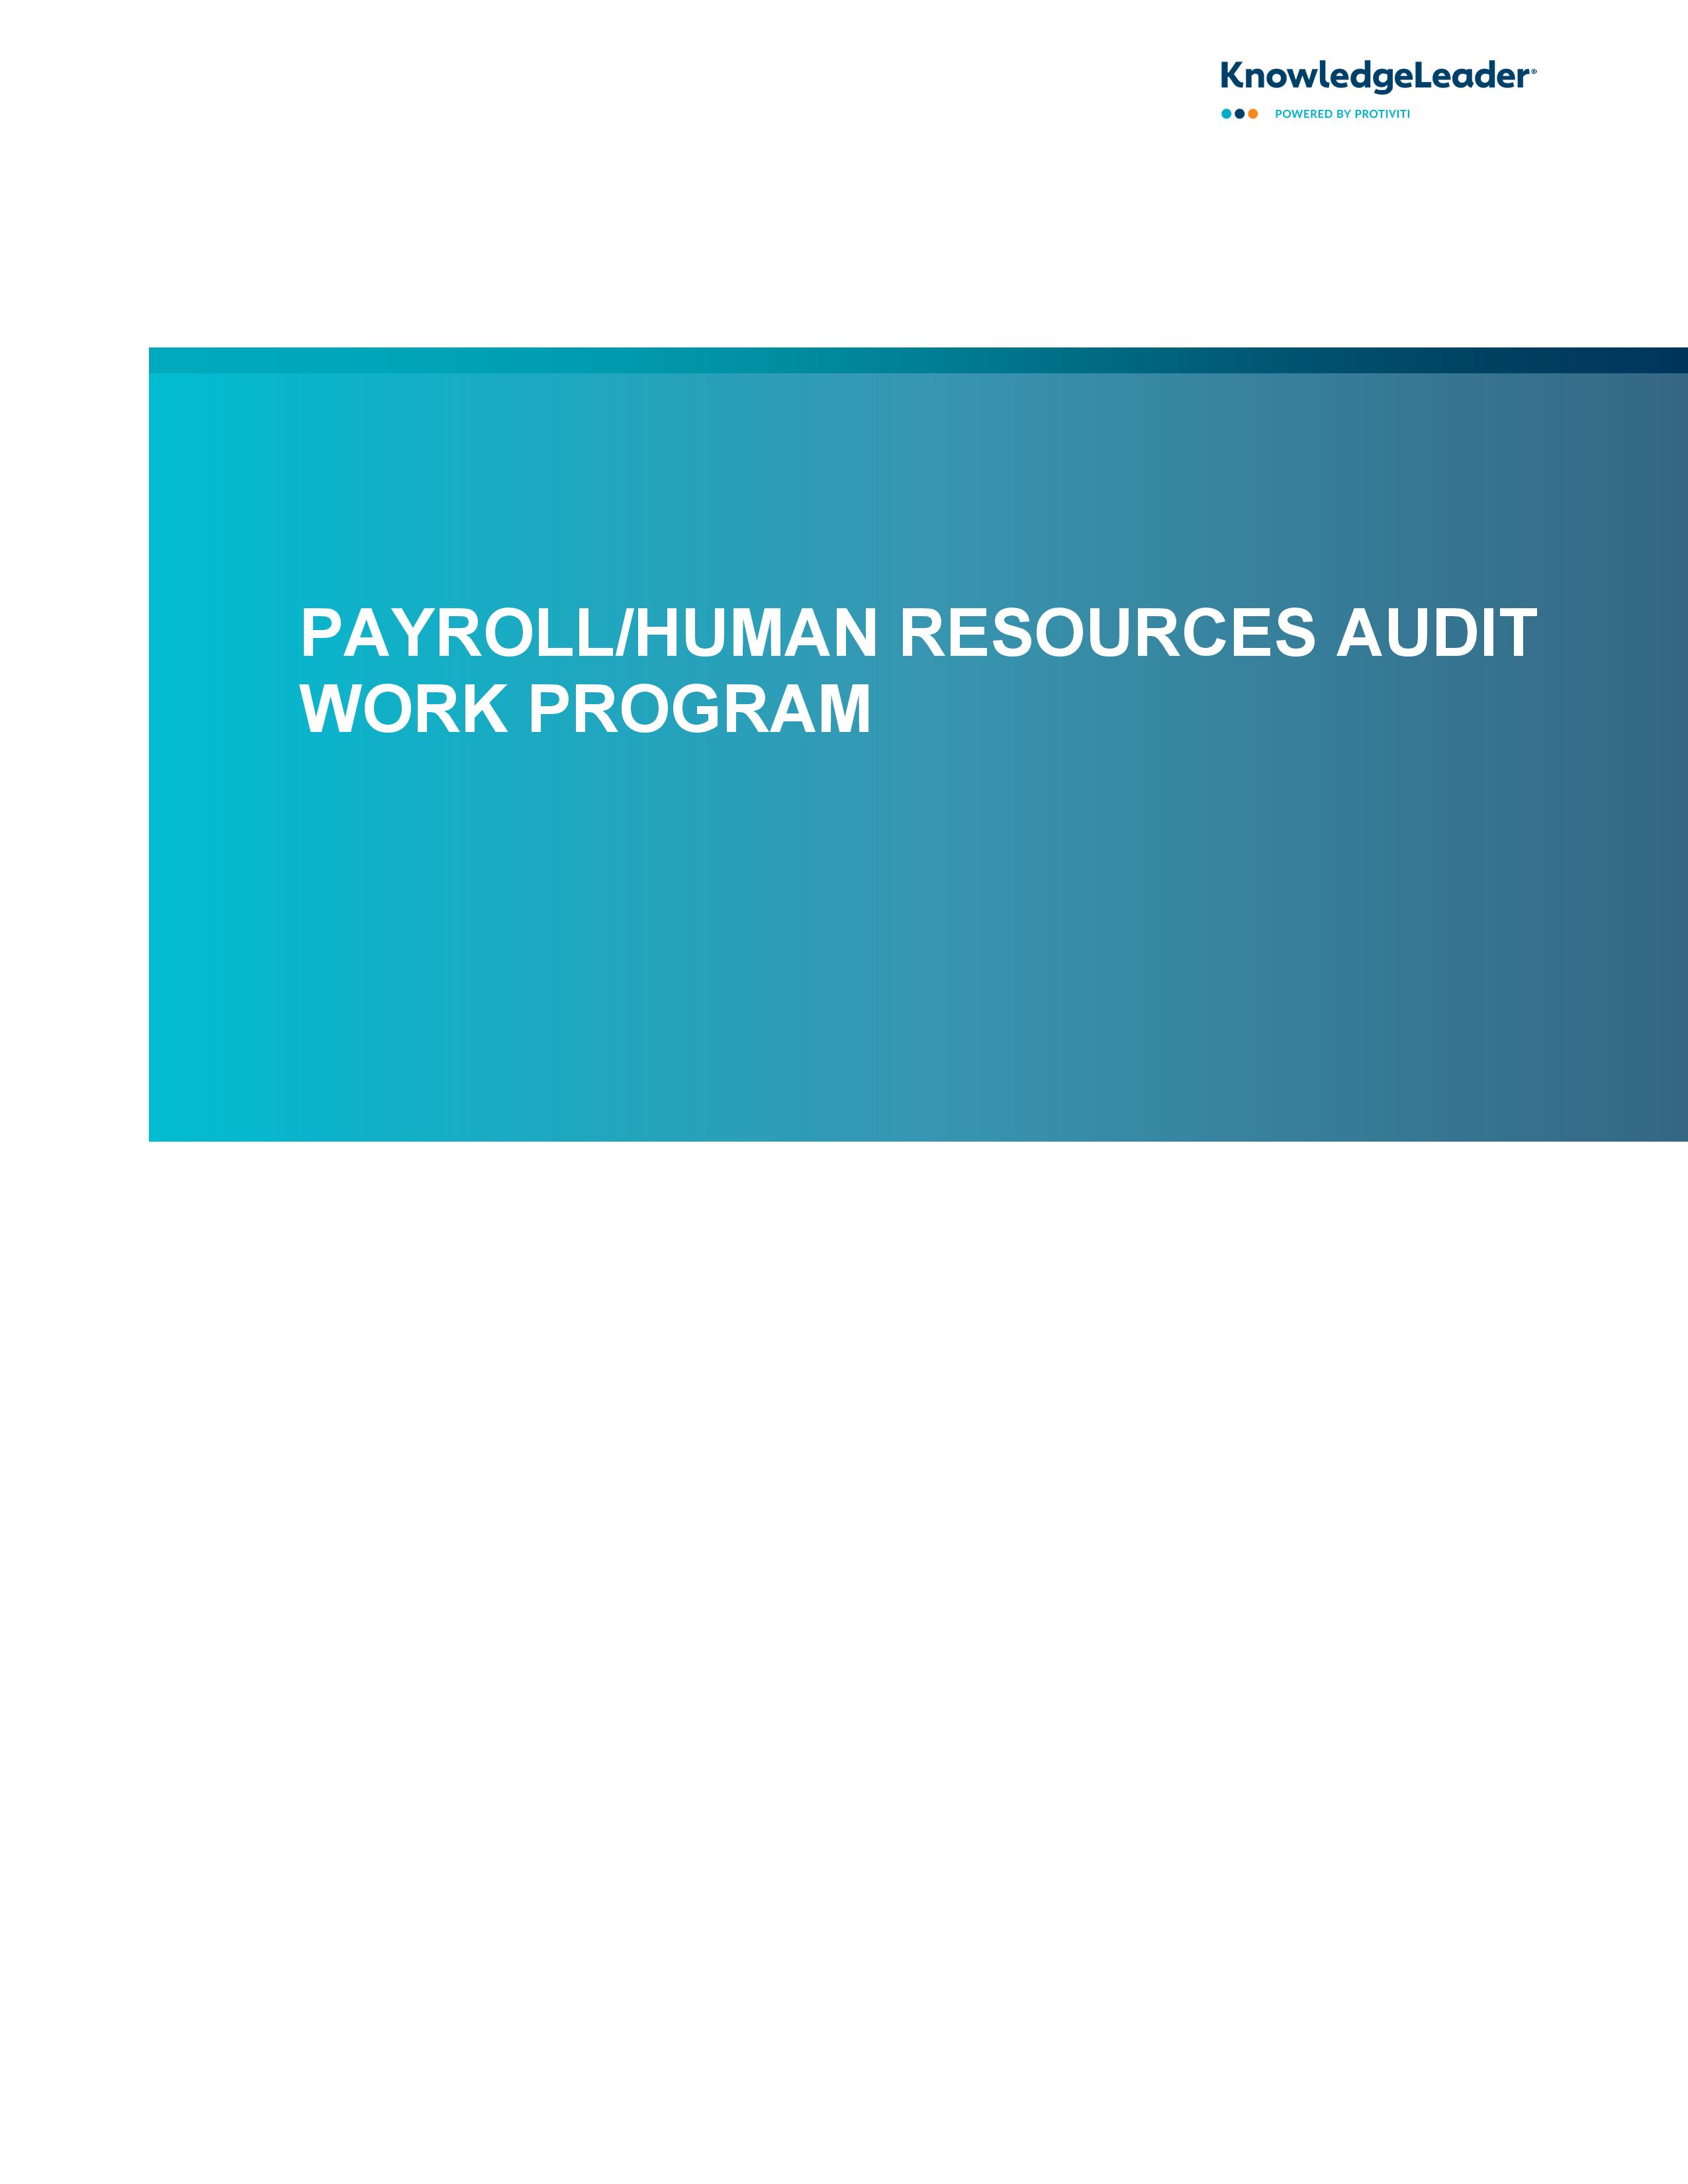 Screenshot of the first page of Payroll Human Resources Audit Work Program